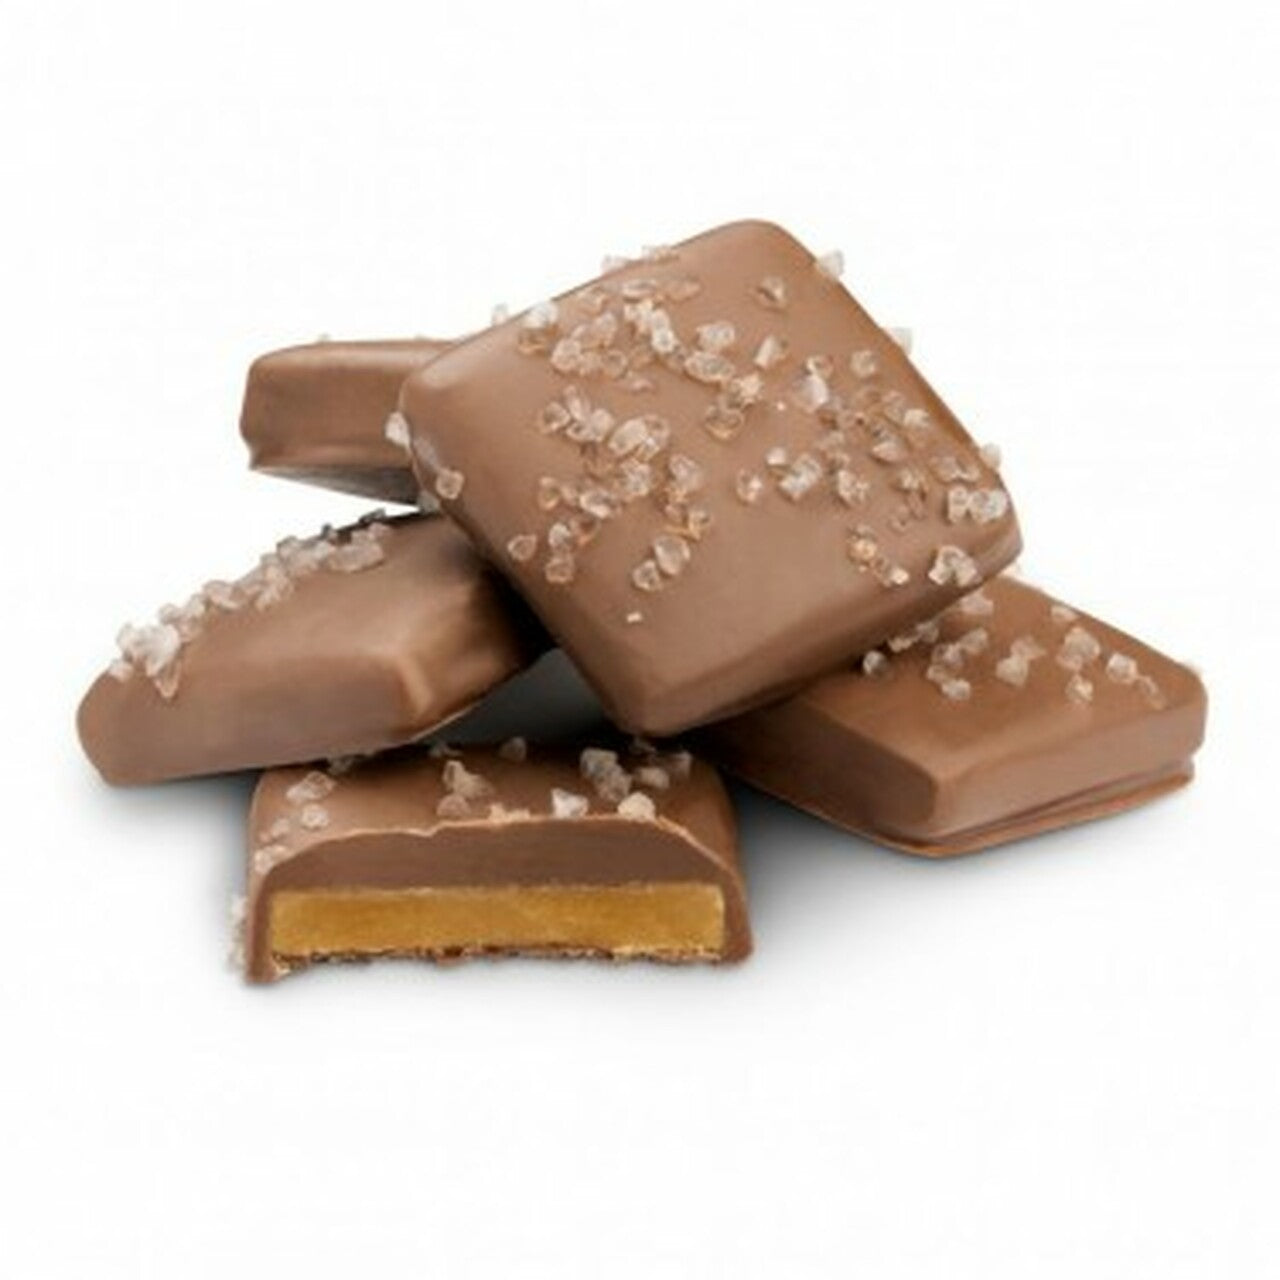 Milk Chocolate Almond Butter Toffee with Sea Salt